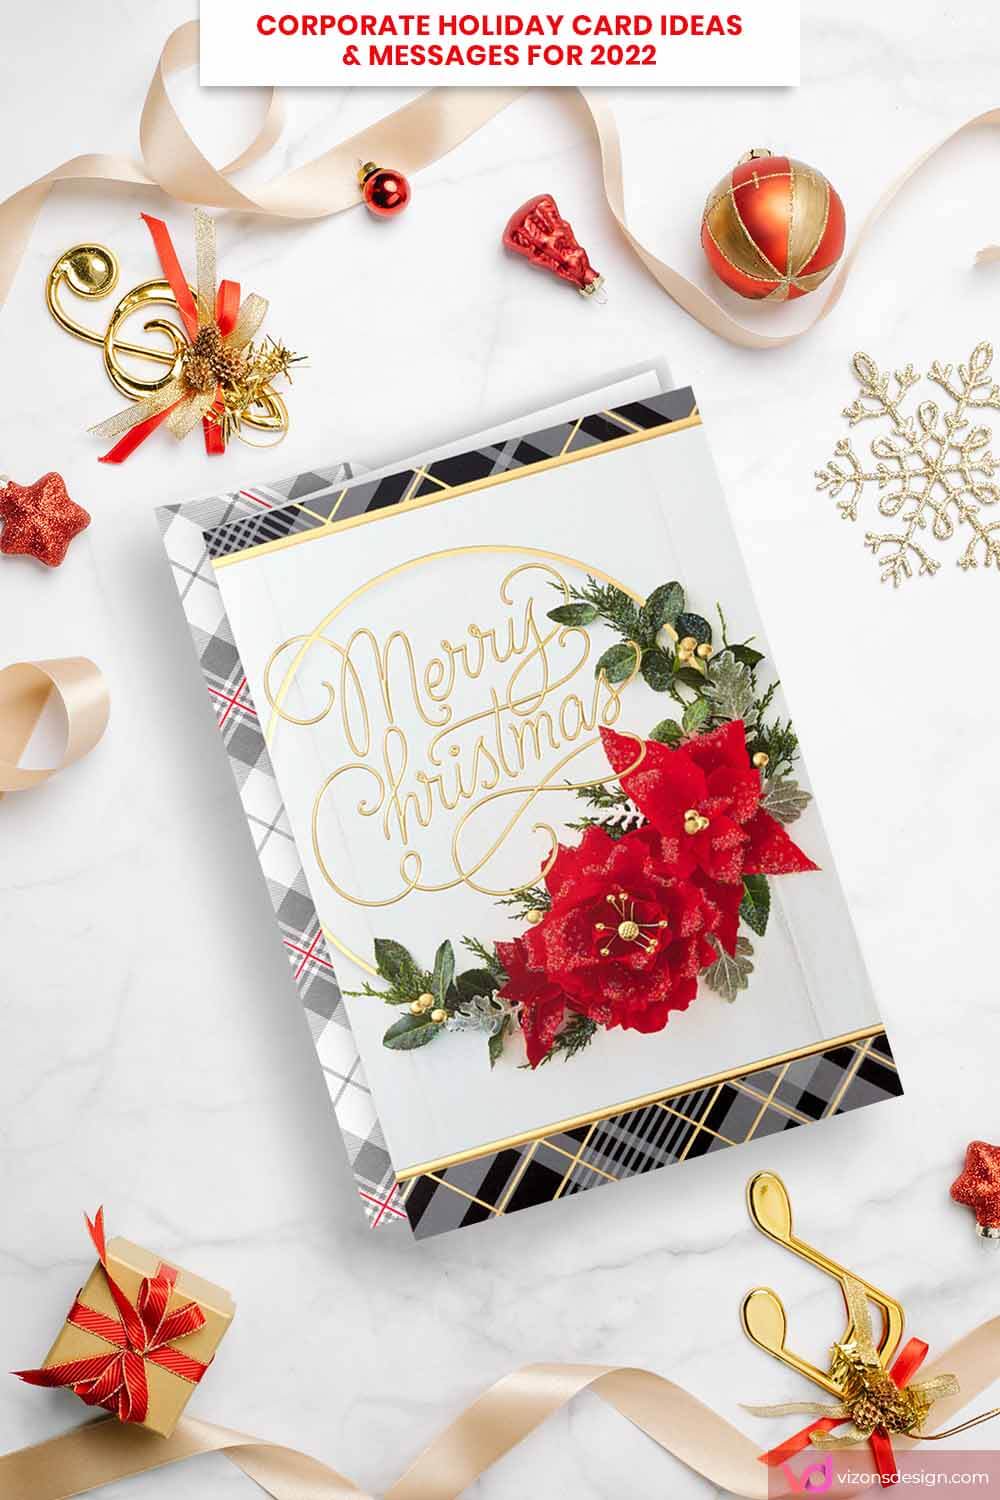 Corporate Holiday Card Ideas & Messages For 2022